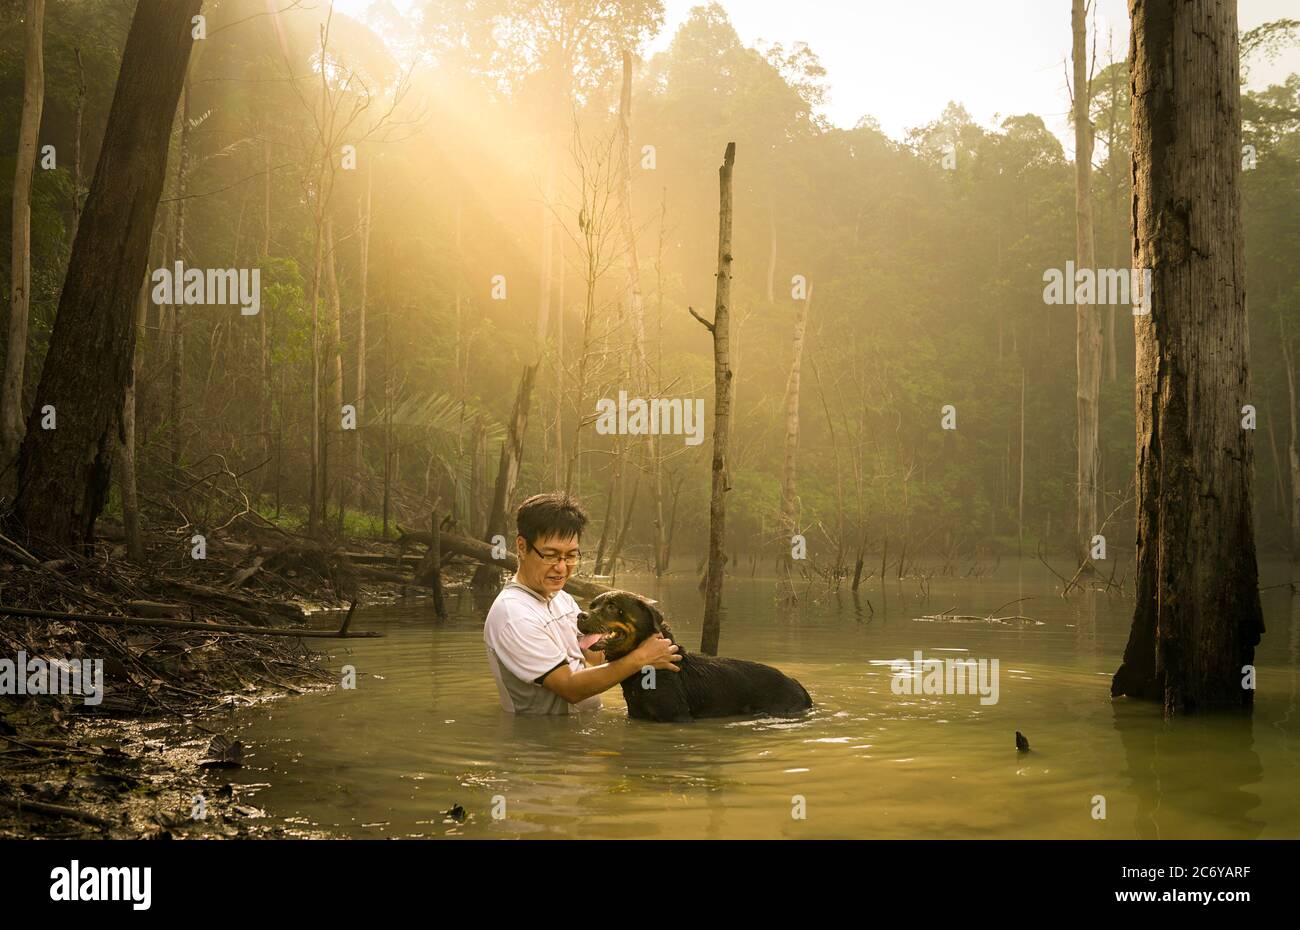 Man with his rottweiler dog inside the lake with beautiful morning sun beam. Bonding time concept. Stock Photo